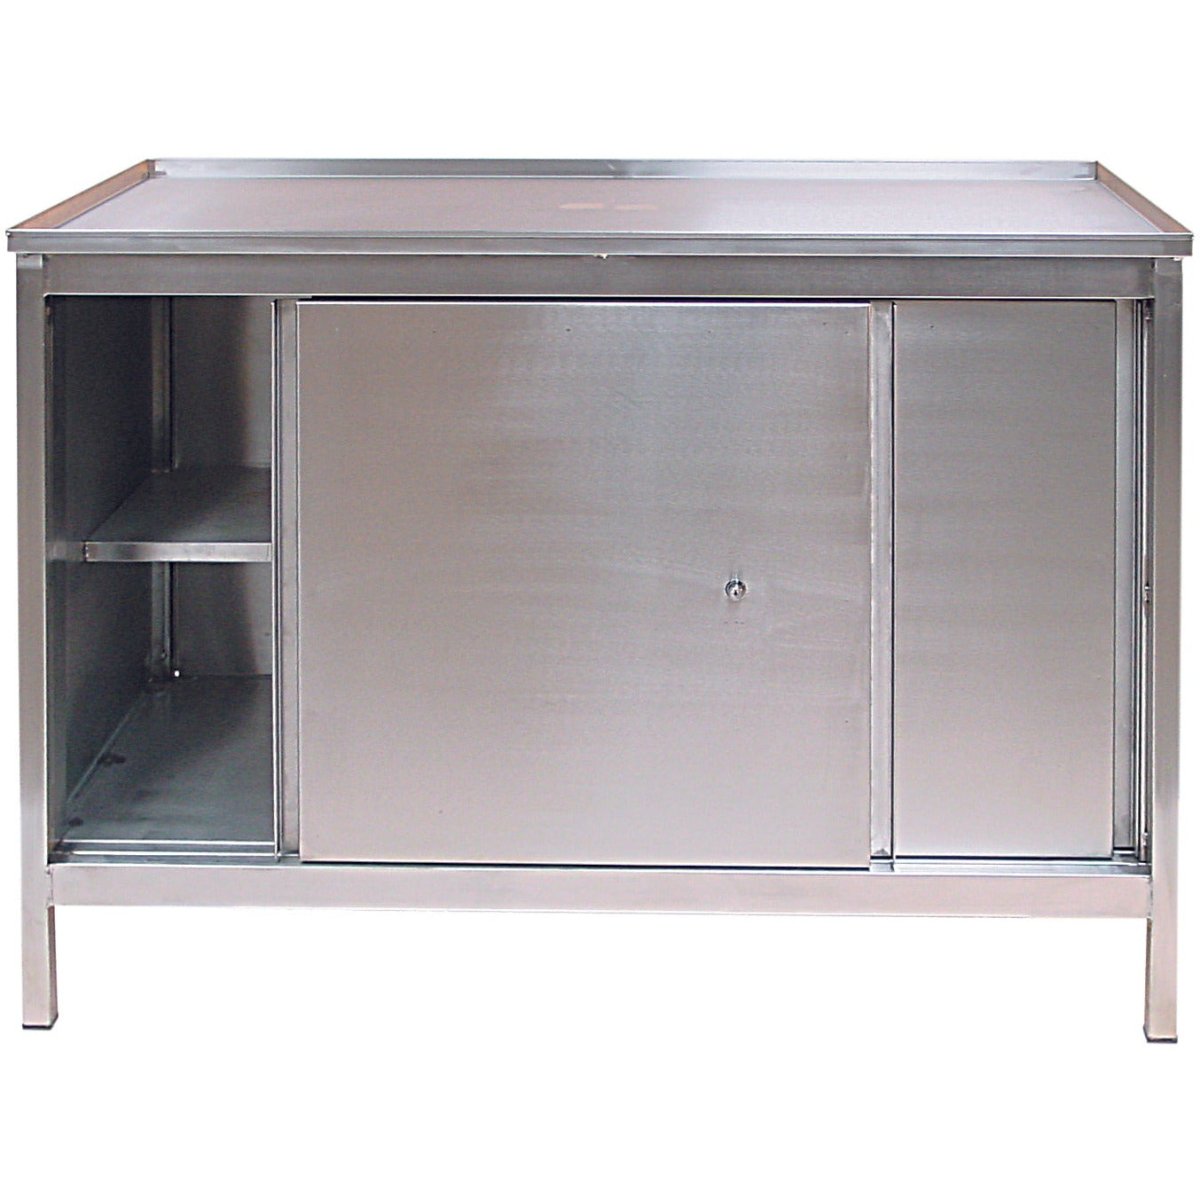 Stainless Steel Heavy Duty Work Cupboard Bench 300Kg Capacity - Warehouse Storage Products